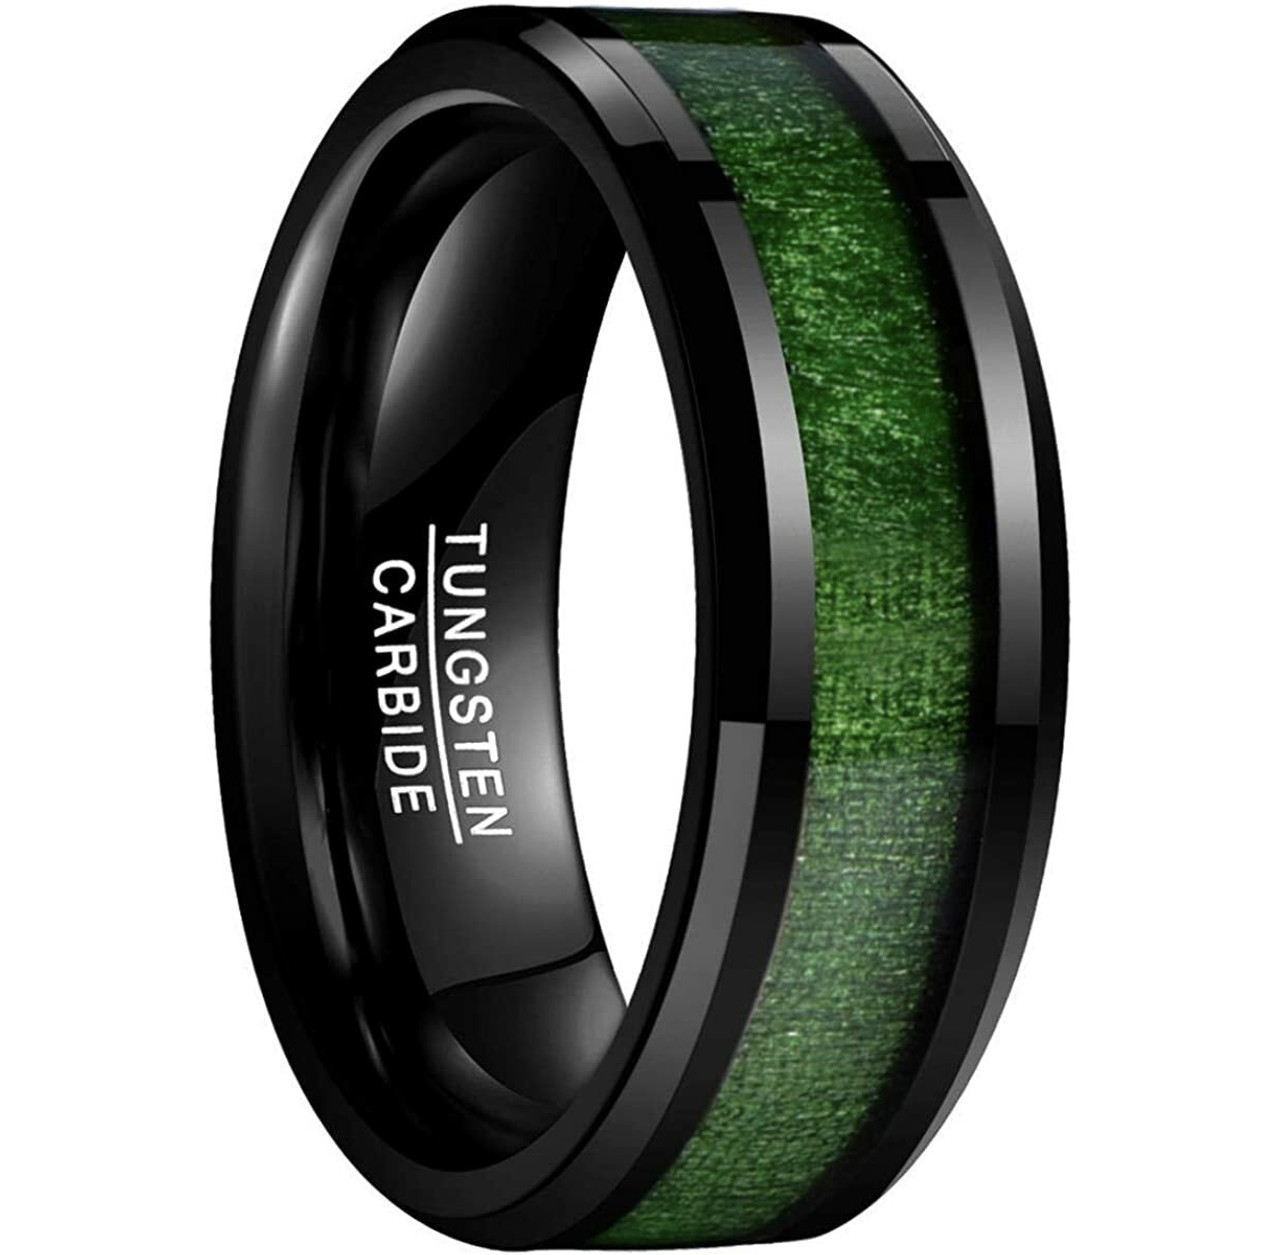 Men's Tungsten Wedding Bands (8mm). Black with High Polish Green Wood Inlay and Beveled Edges